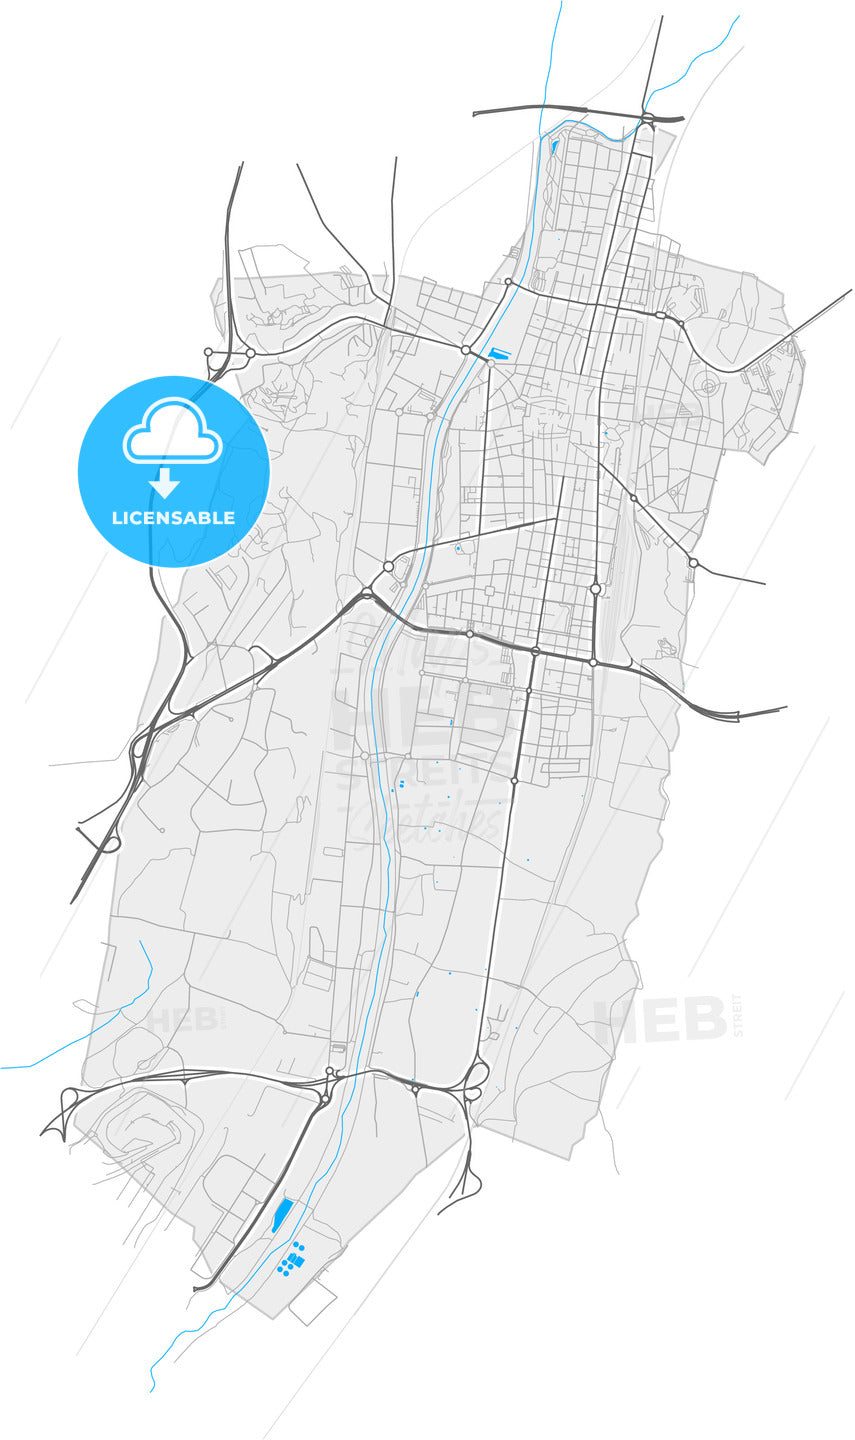 Granollers, Barcelona, Spain, high quality vector map